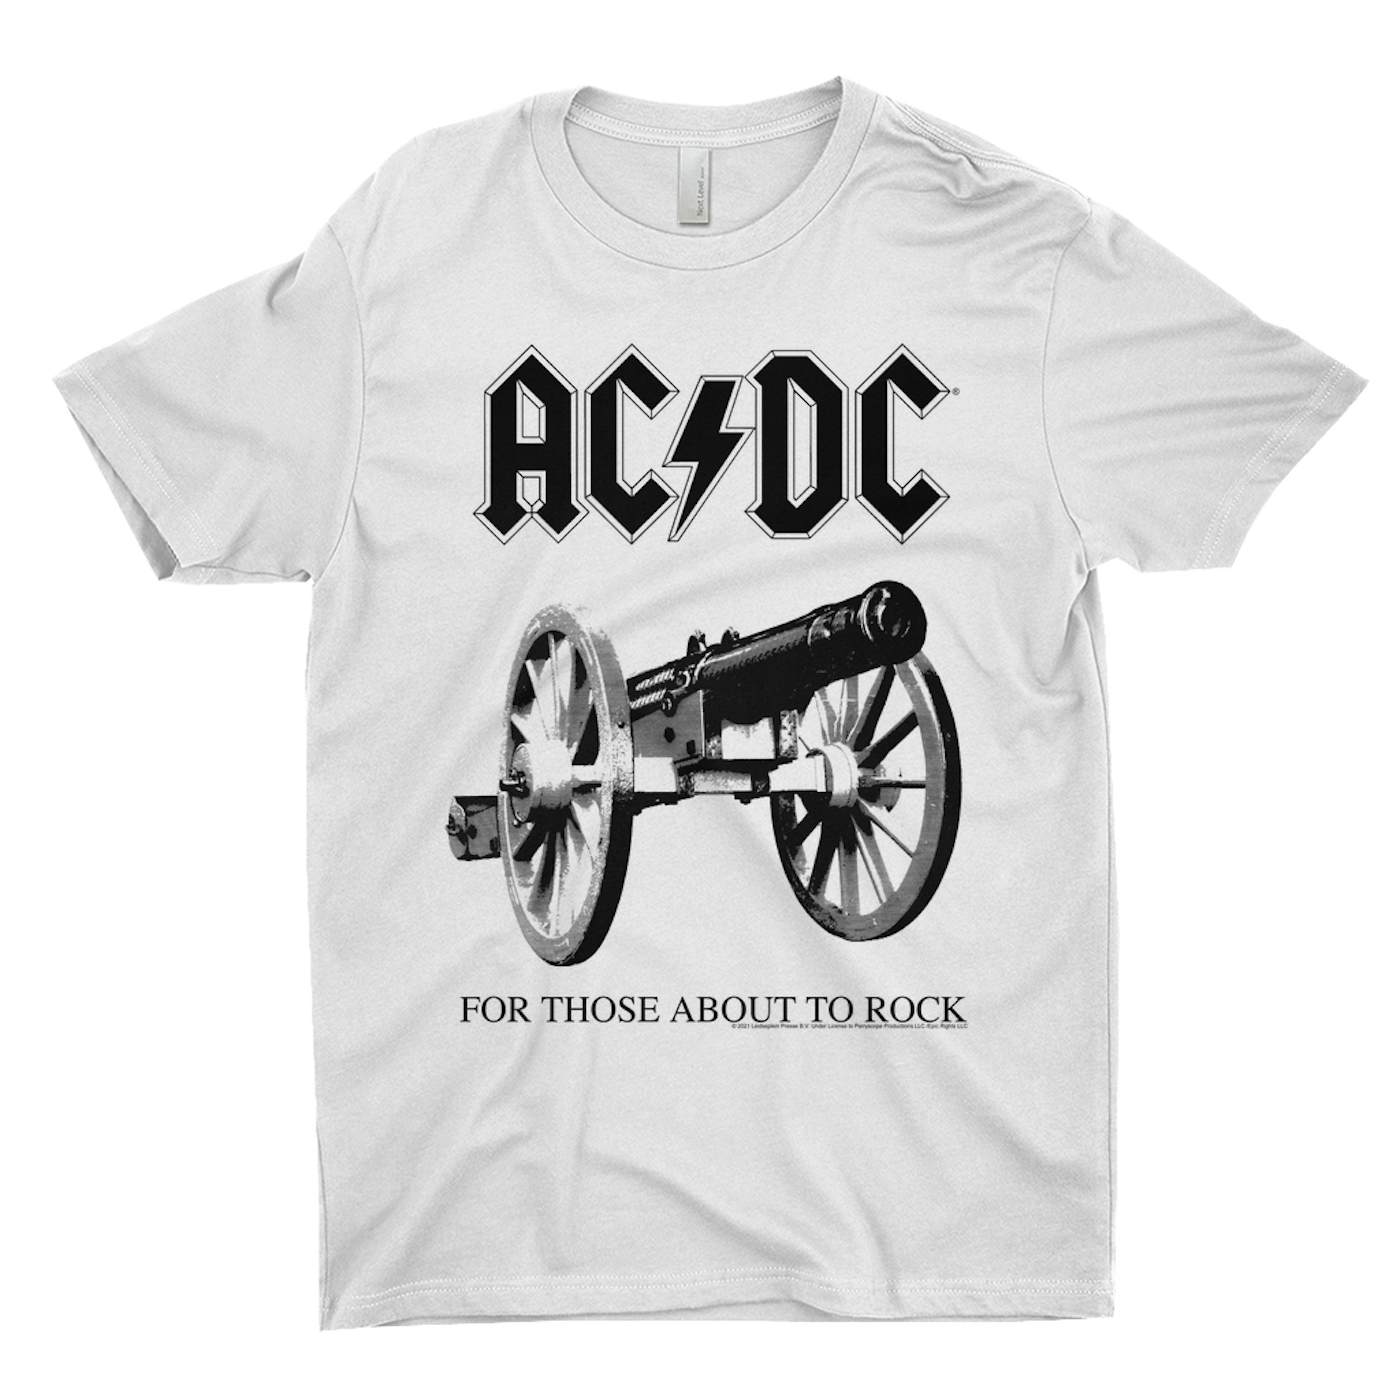 AC/DC T-Shirt Image Black To Cannon About Those | Rock For Shirt